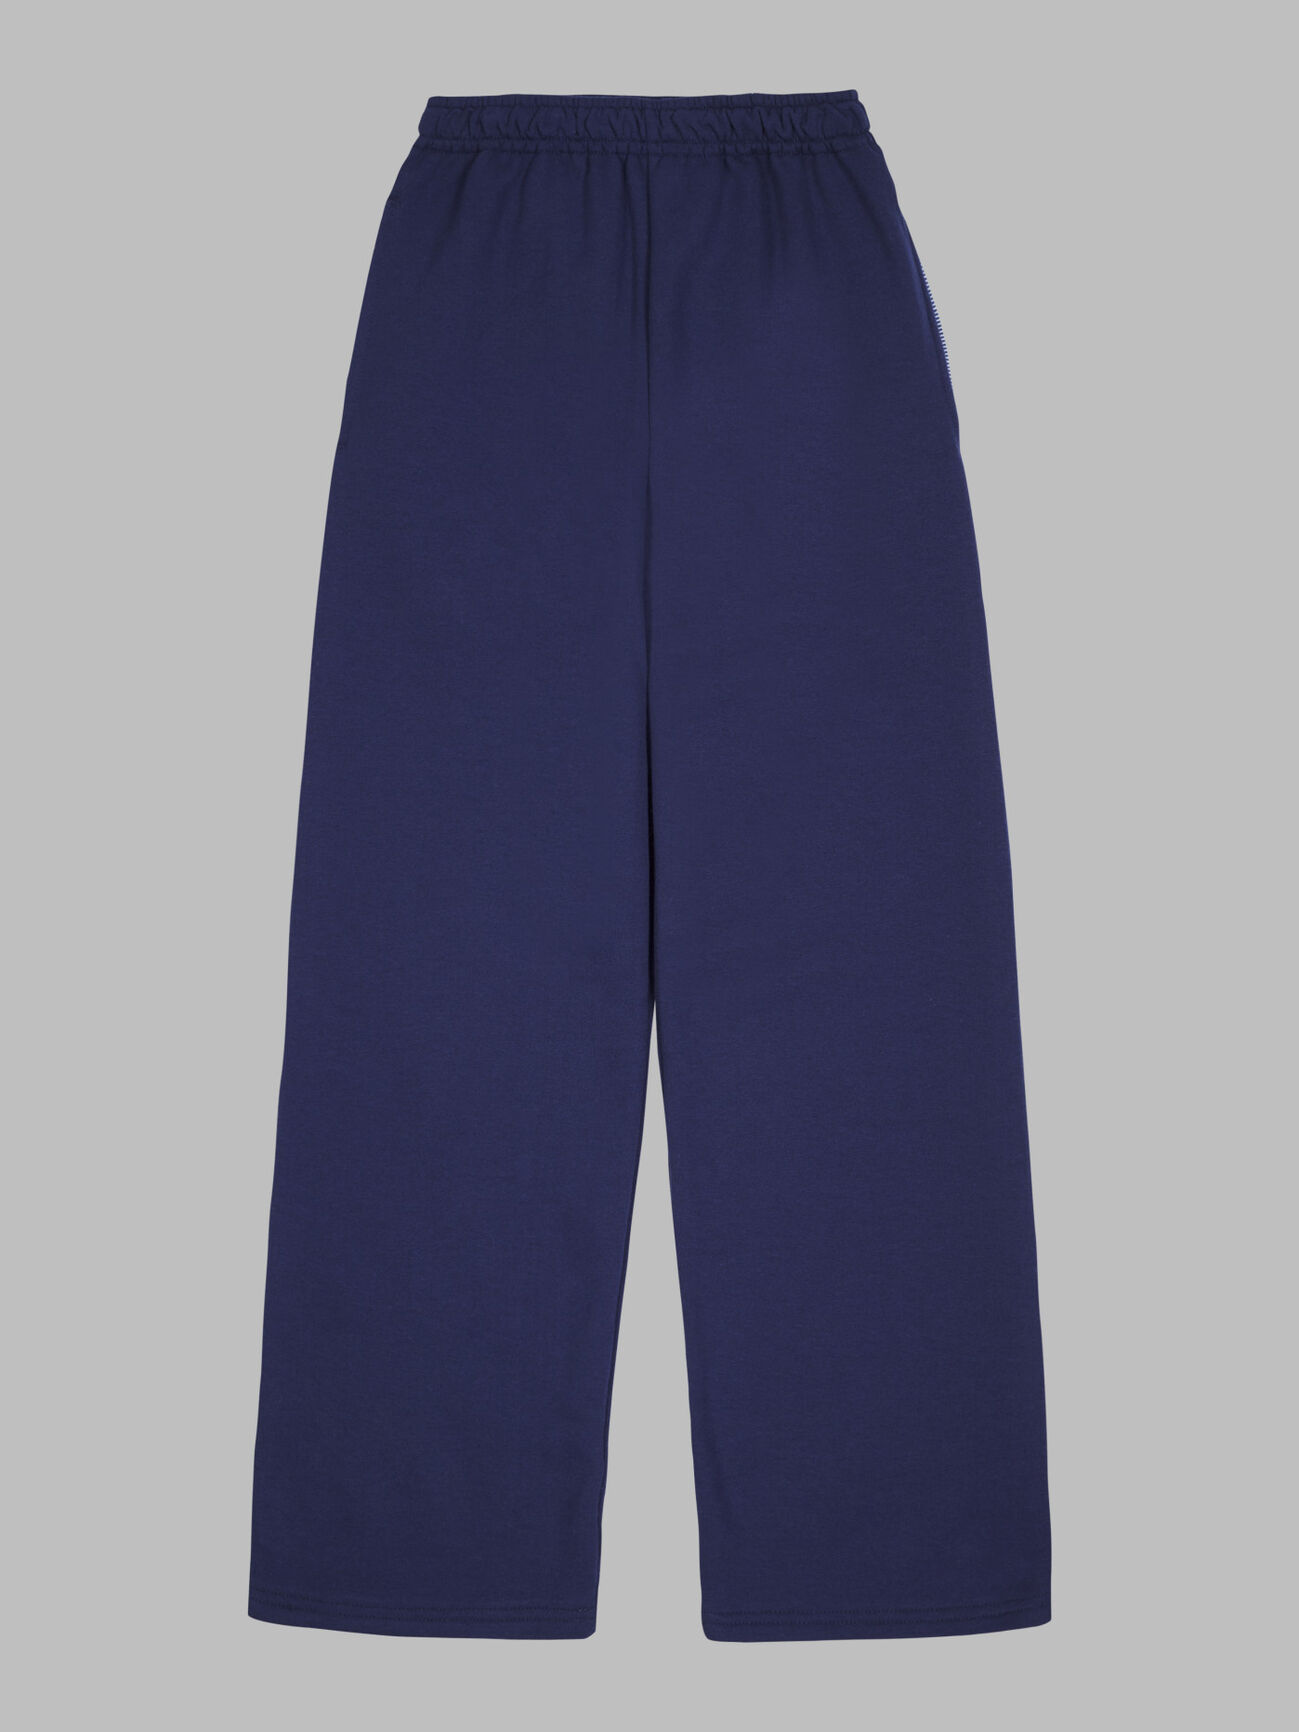 Fruit of the Loom Polyester Athletic Sweat Pants for Women